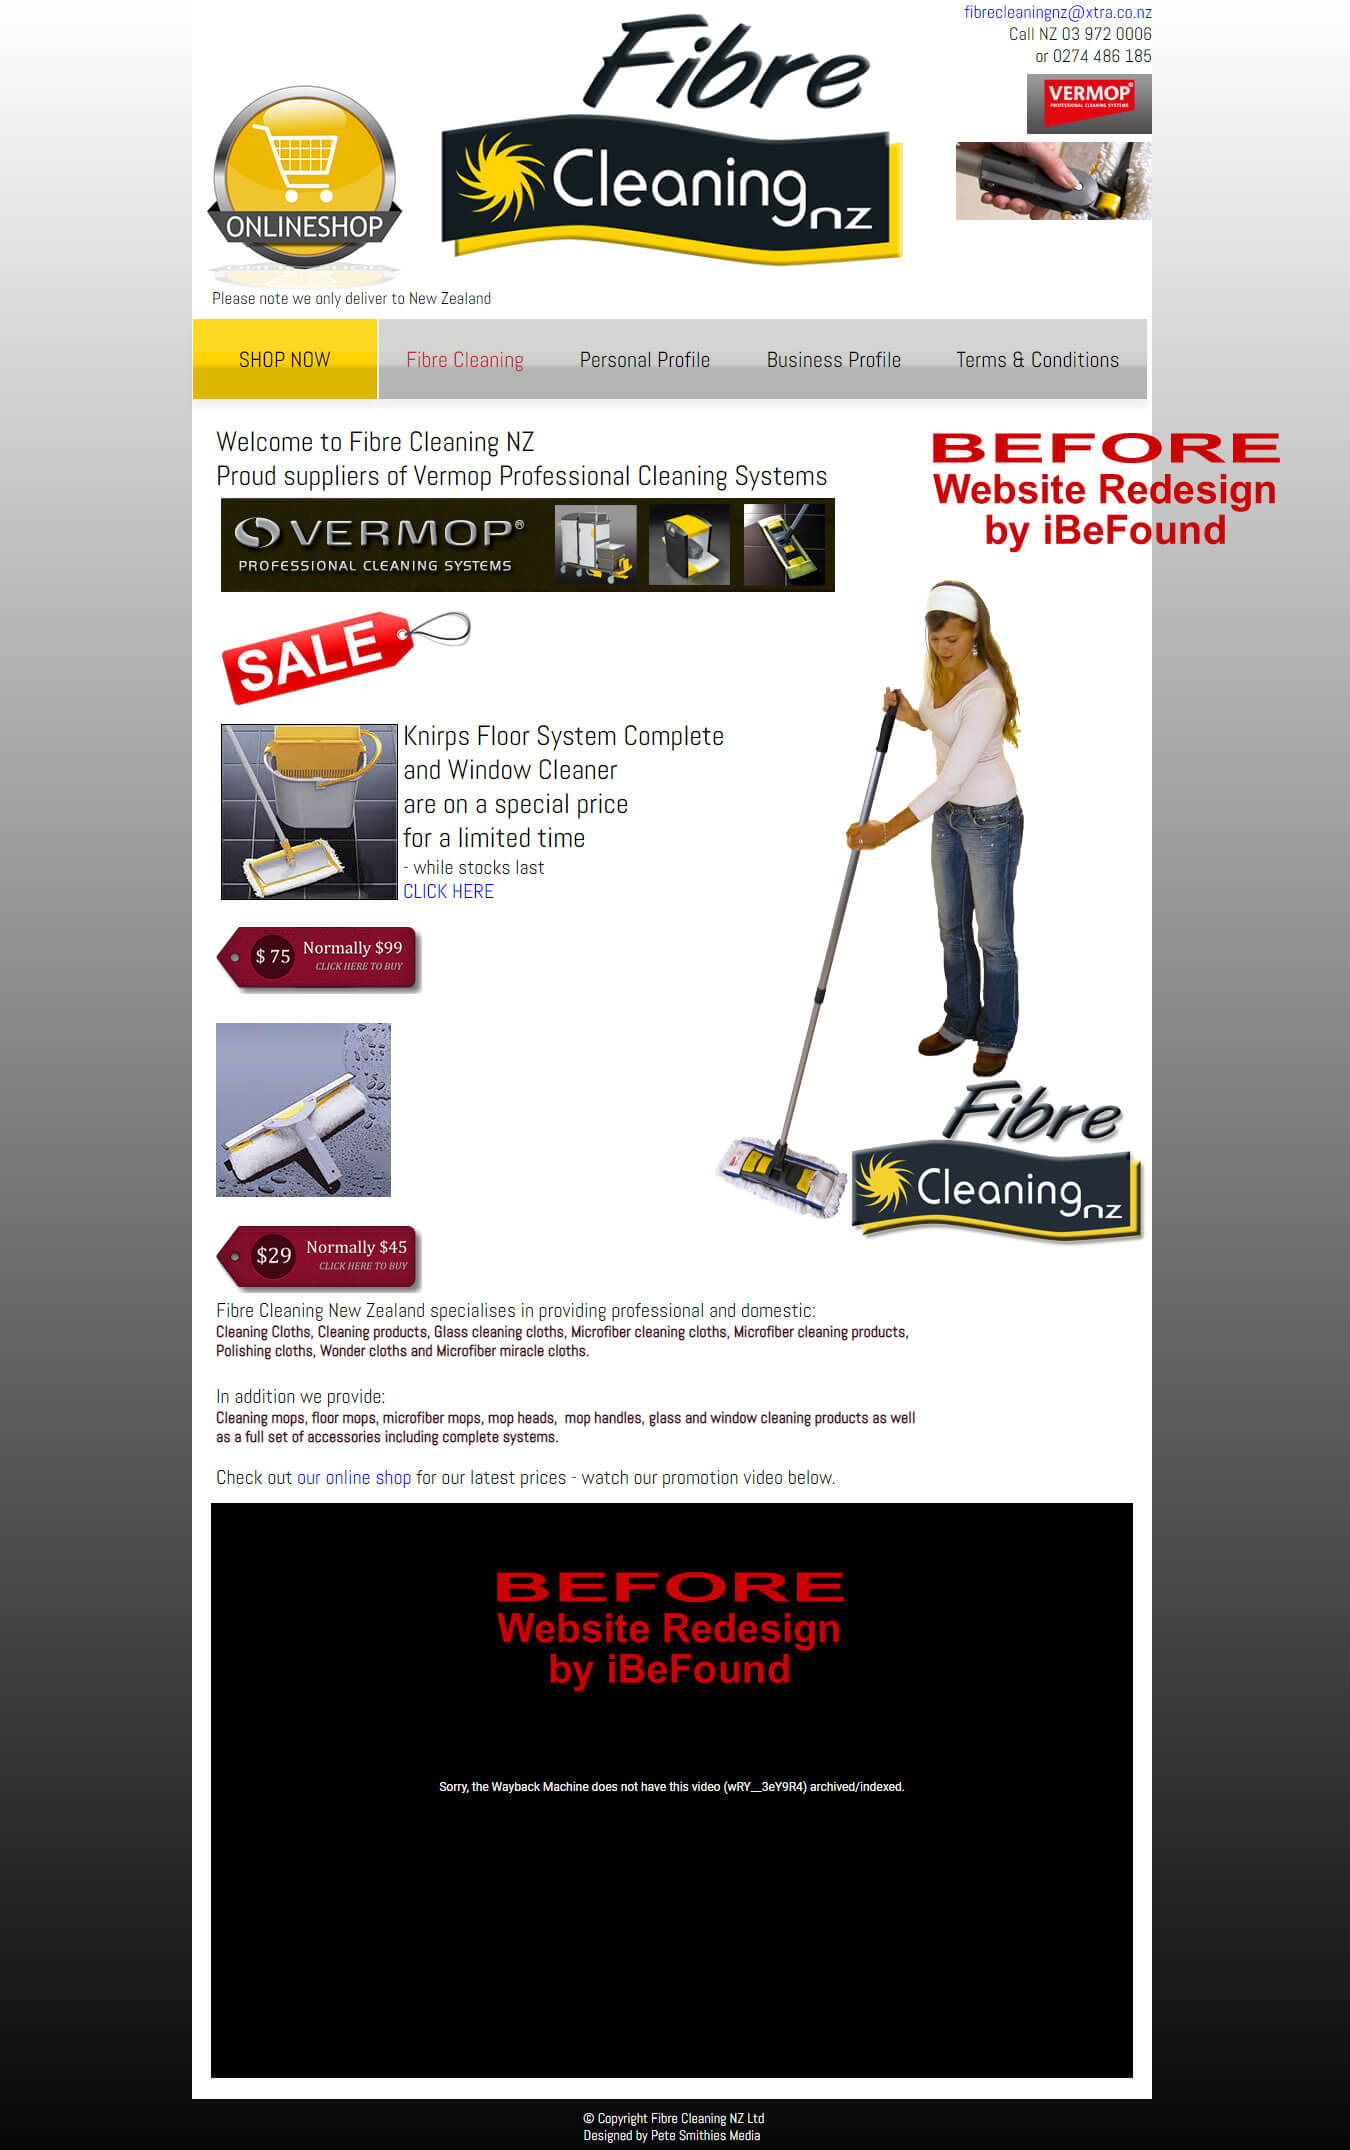 Homepage Of Fibre Cleaning NZ Ltd Before Website Redesign By IBeFound Digital Marketing